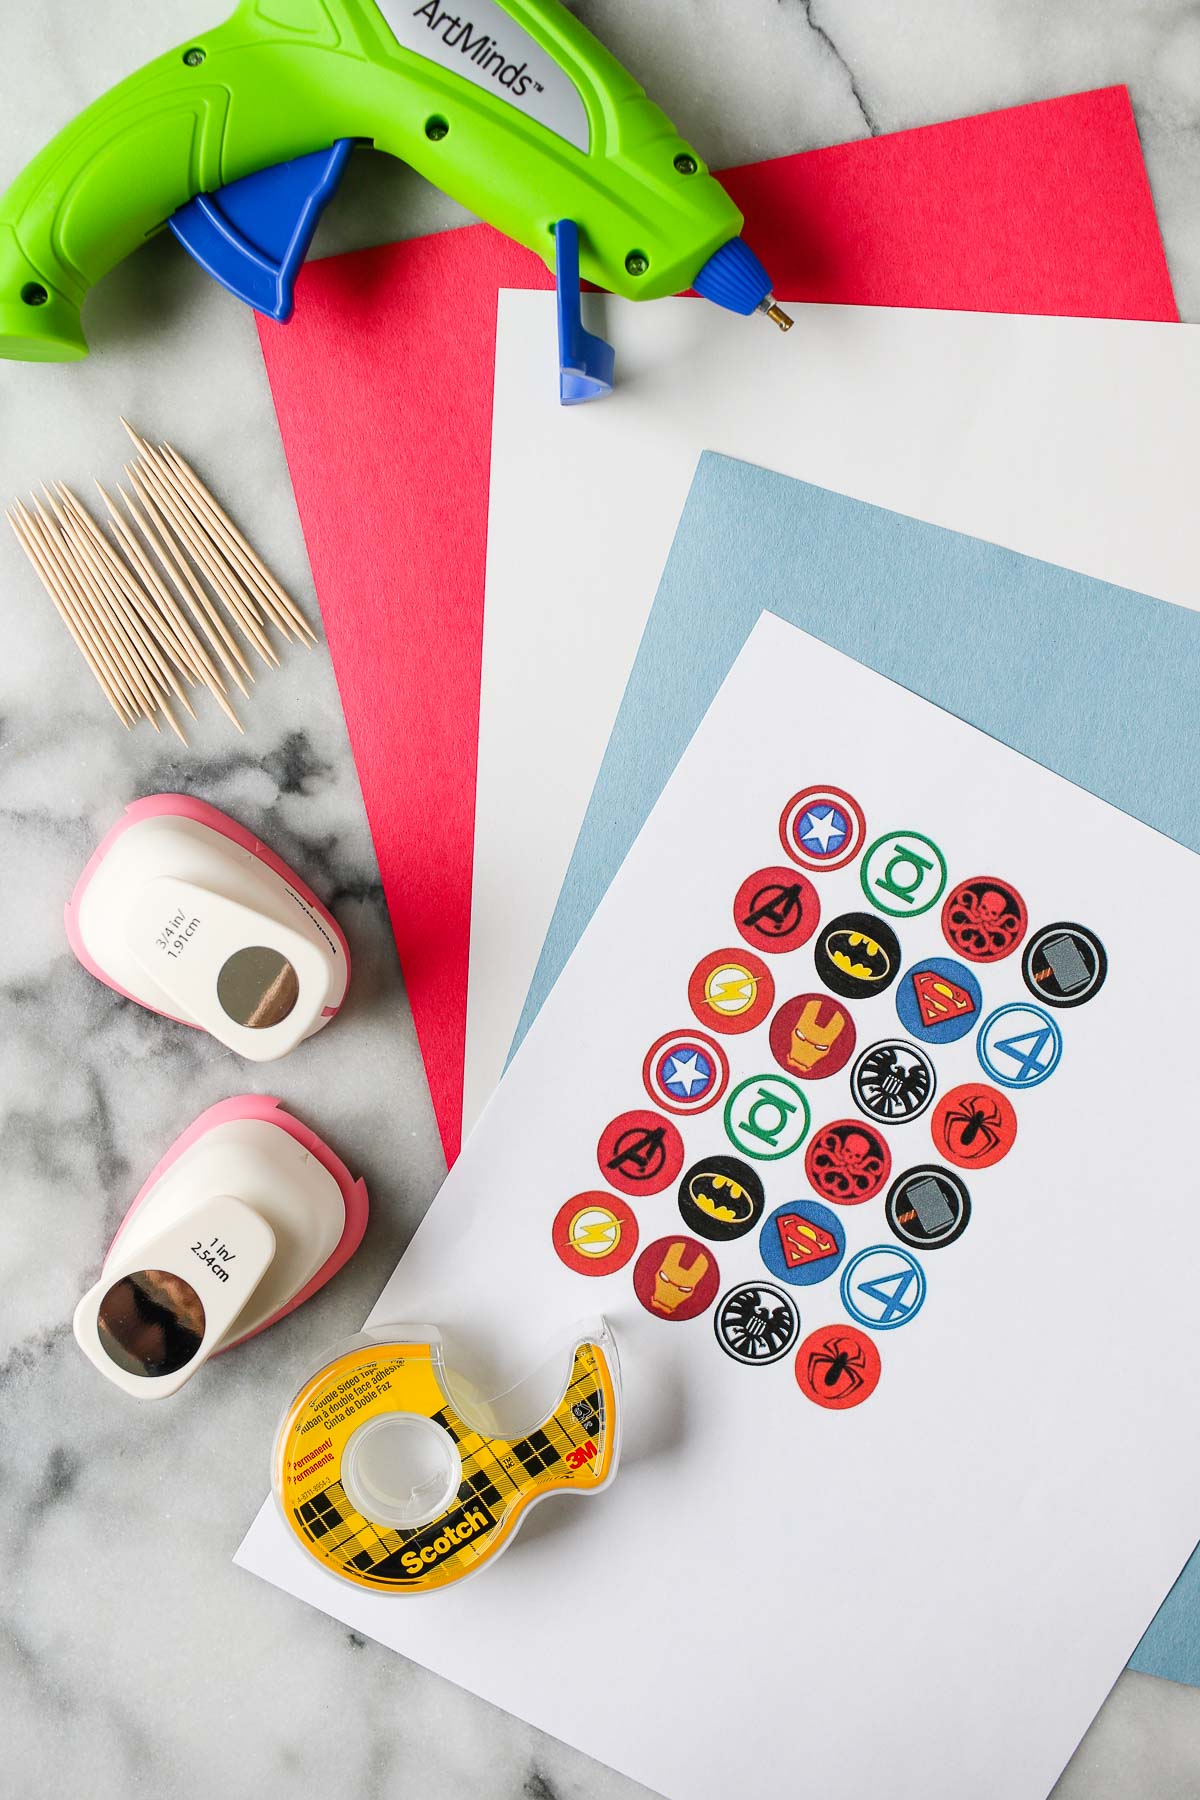 DIY cupcake toppers instructions